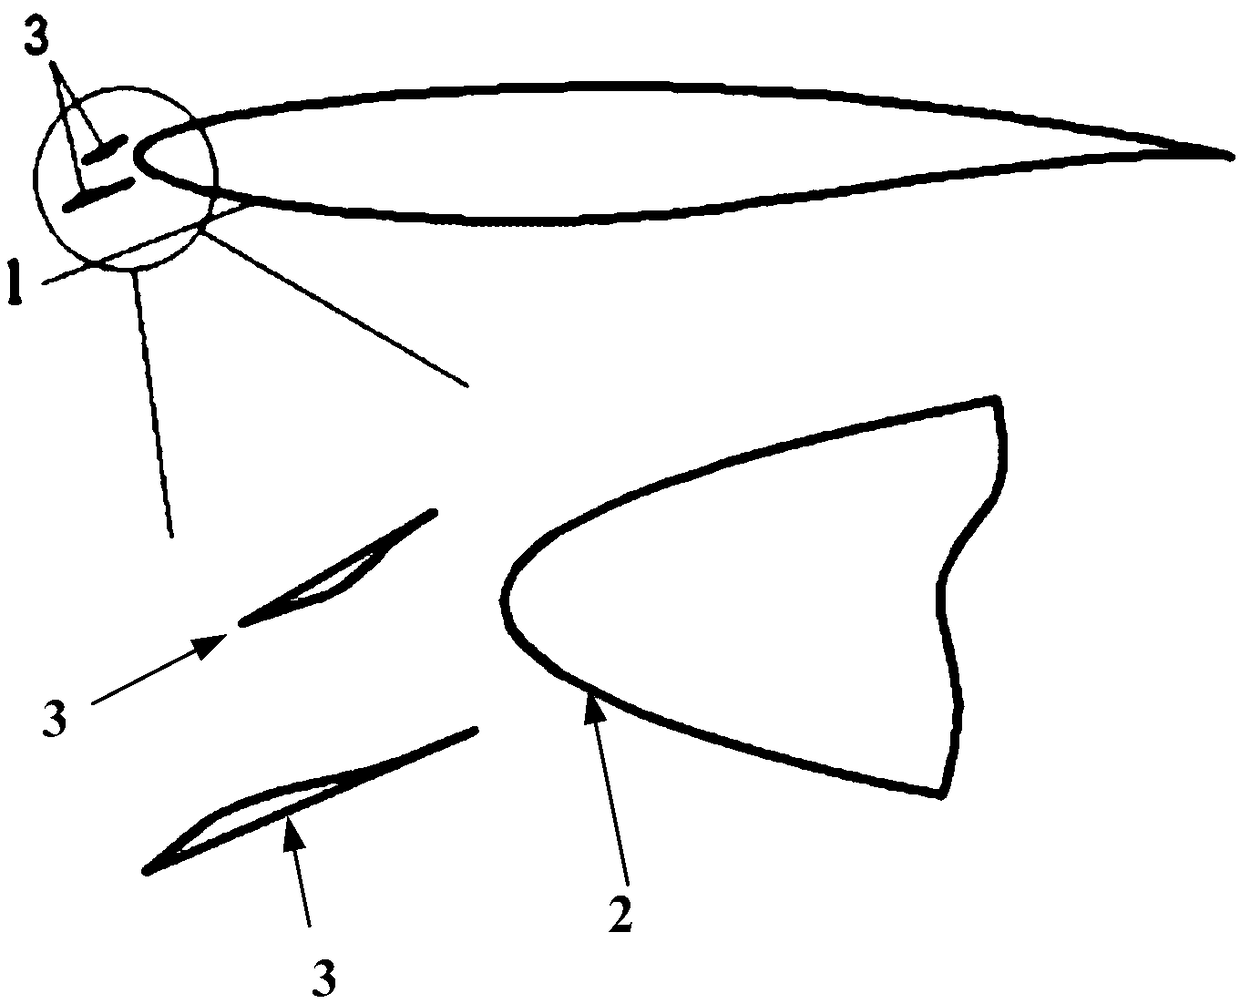 Variable wing leading edge combining subsonic aerodynamic performance and supersonic aerodynamic performance